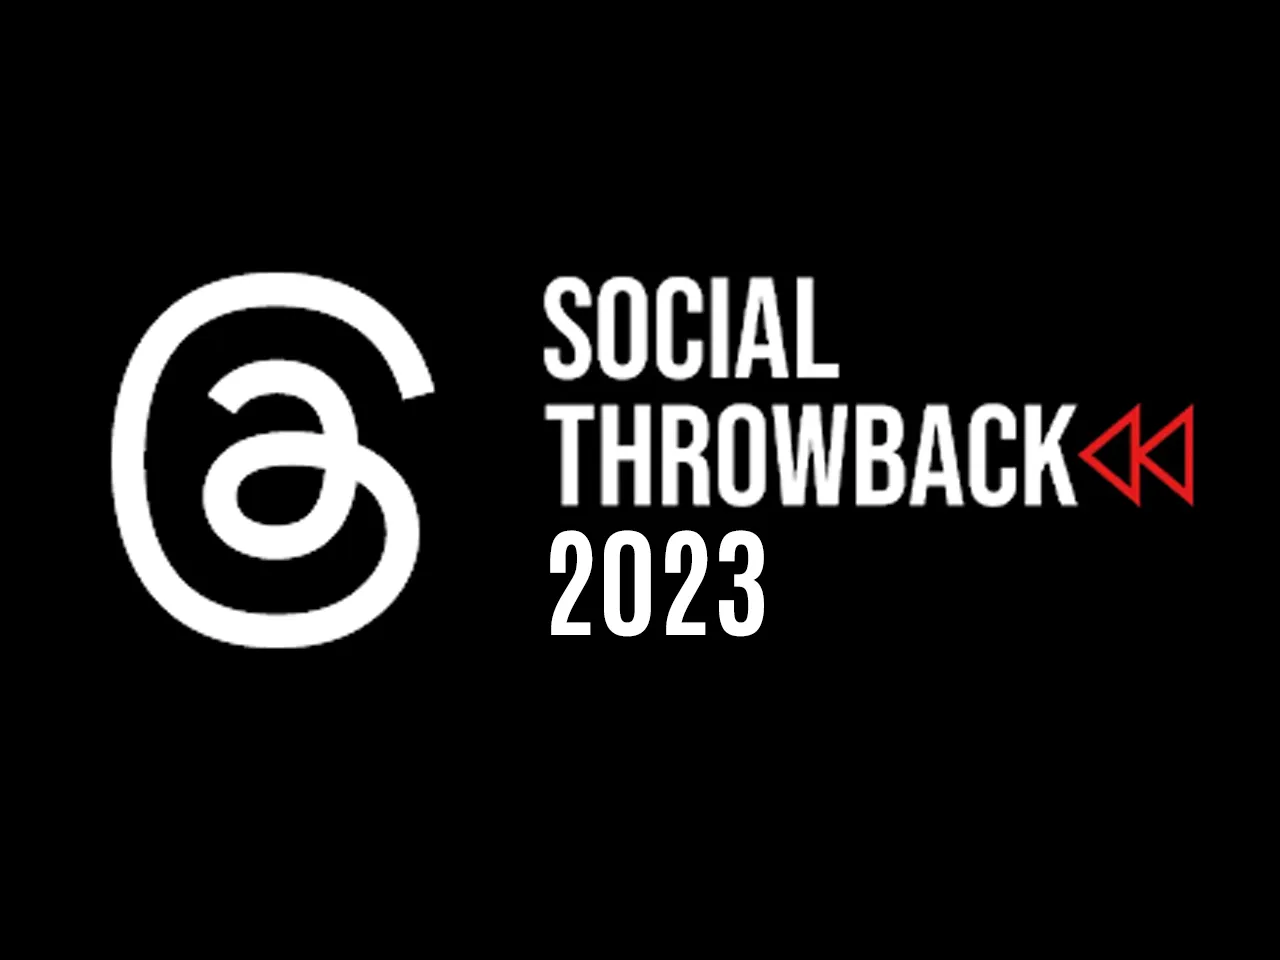 Social Throwback 2023: All updates that strengthened Threads' social media experiment